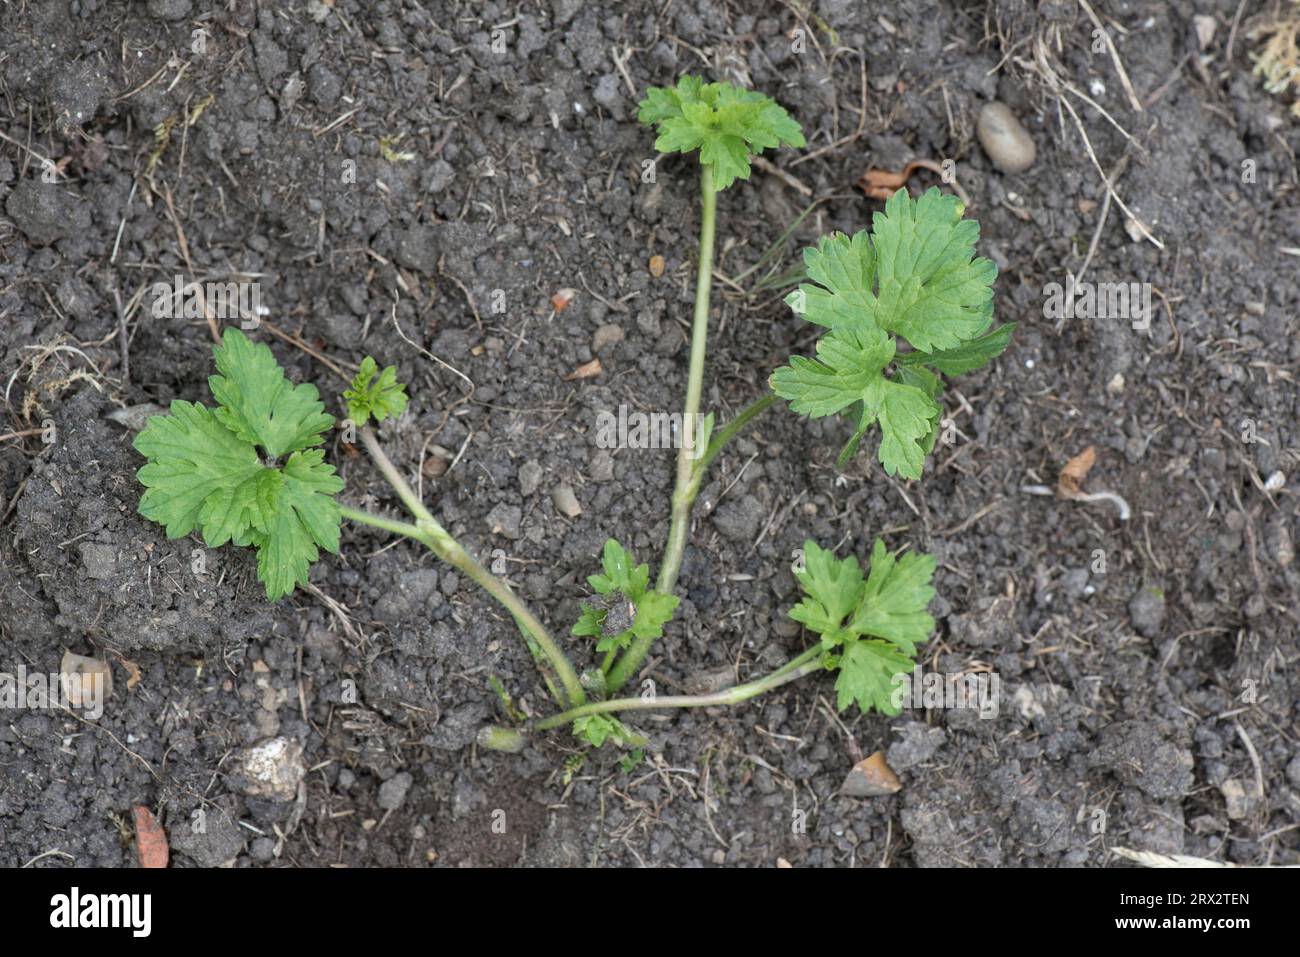 Creeping buttercup (Ranunculus repens) young prostrate perennial weed plant with stoloniferous running stems in a garden flower bed, June Stock Photo